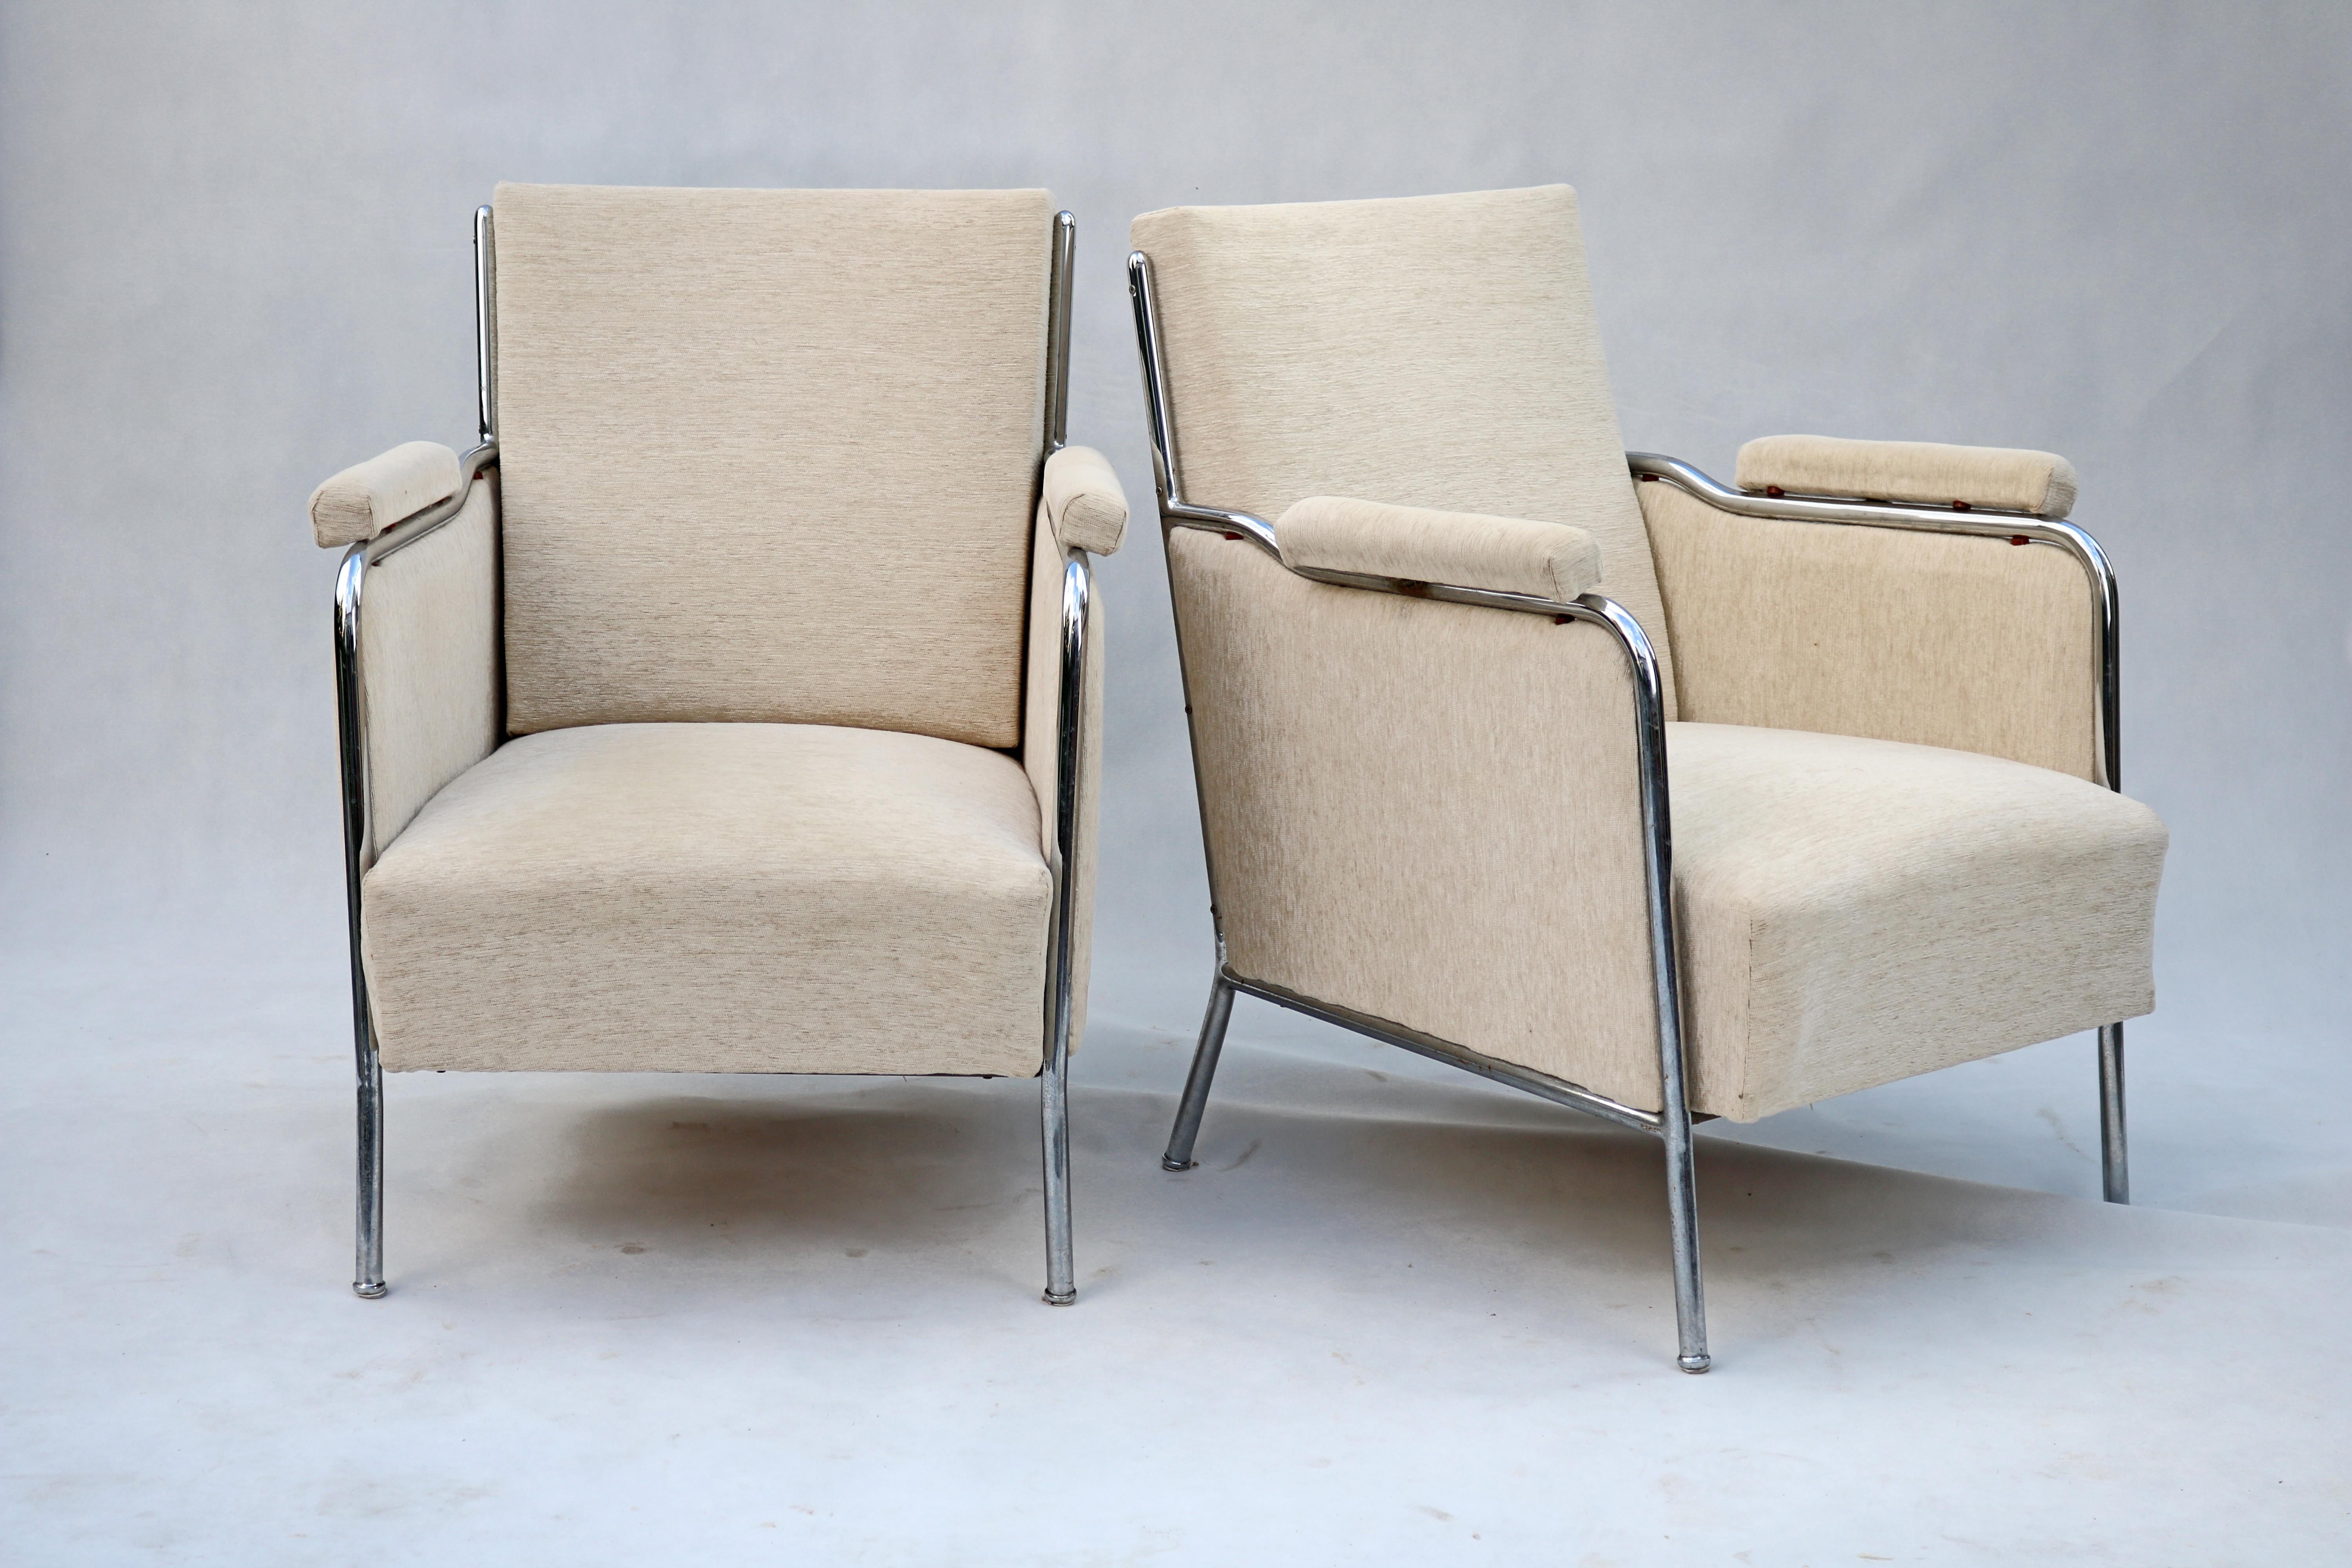 Armchairs, Set of 2, Mid 20th Century, by Joszef Peresztegi In Good Condition For Sale In Lučenec, SK